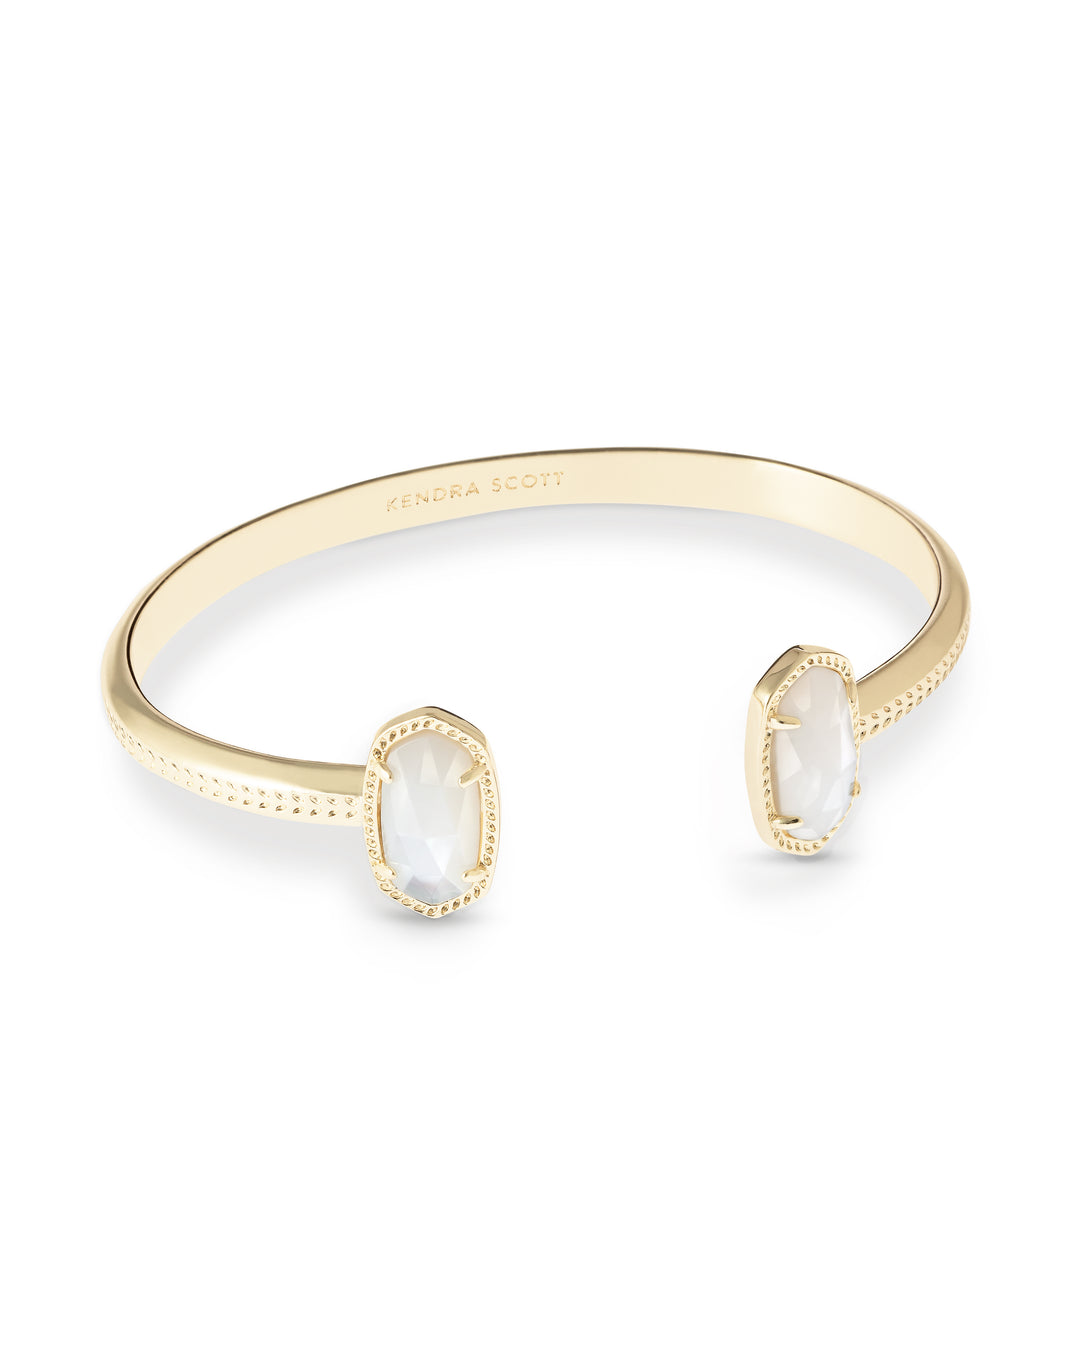 ELTON CUFF BRACELET, GOLD IVORY MOTHER OF PEARL